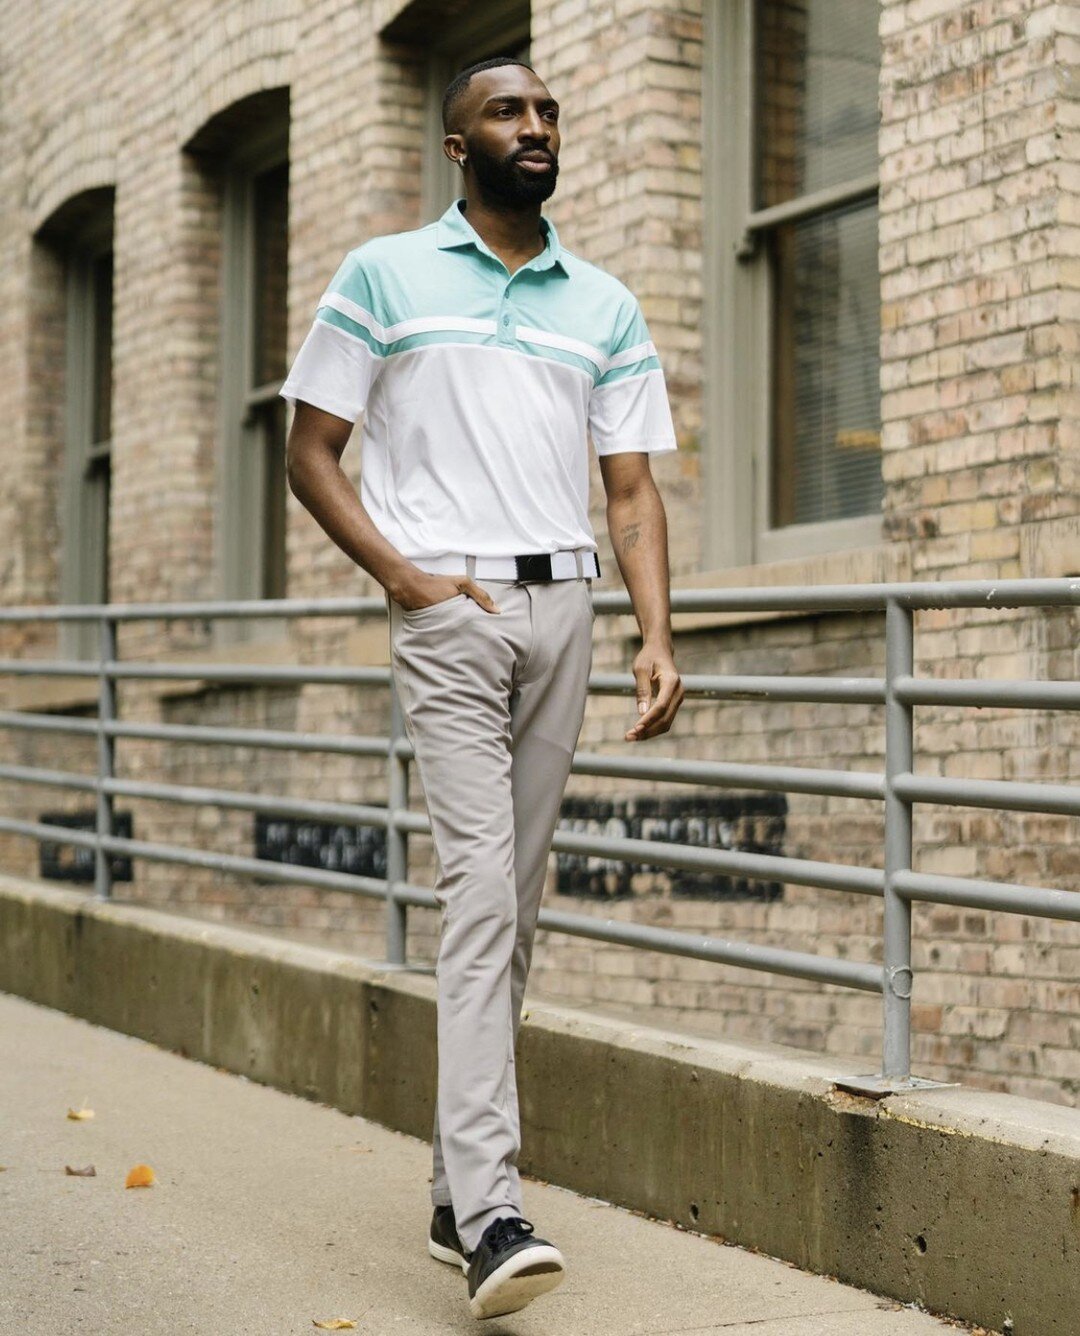 Looking cool and confident is easy with this lightweight, quick-drying polo. We paired classic white with a pop of vibrant turquoise for a contrasting design that&rsquo;s fresh and unique.

The silky, sweat-wicking fabric offers the ease of generous 